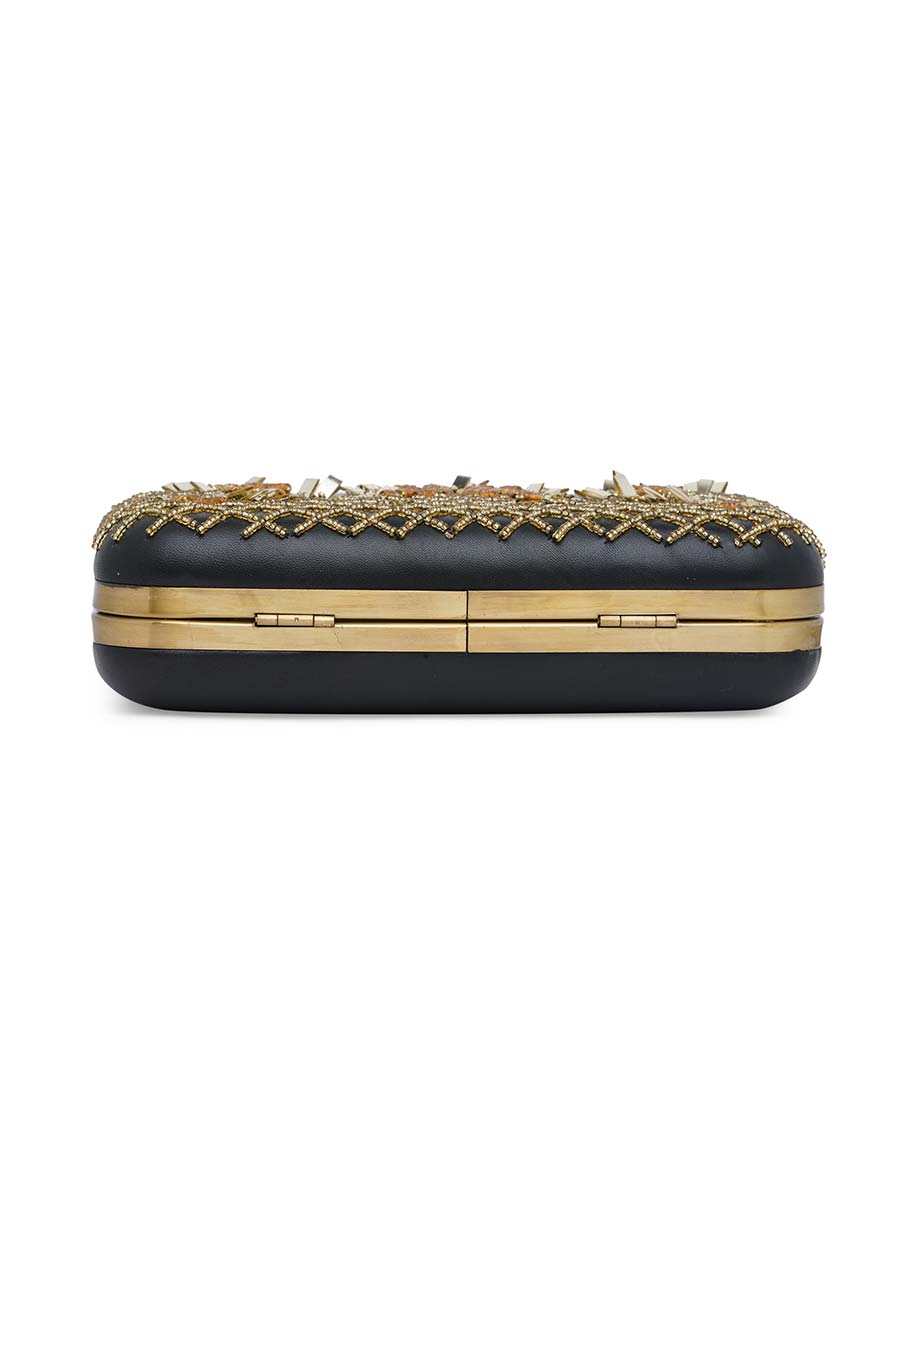 Black & Gold Embroidered Leather Clutch